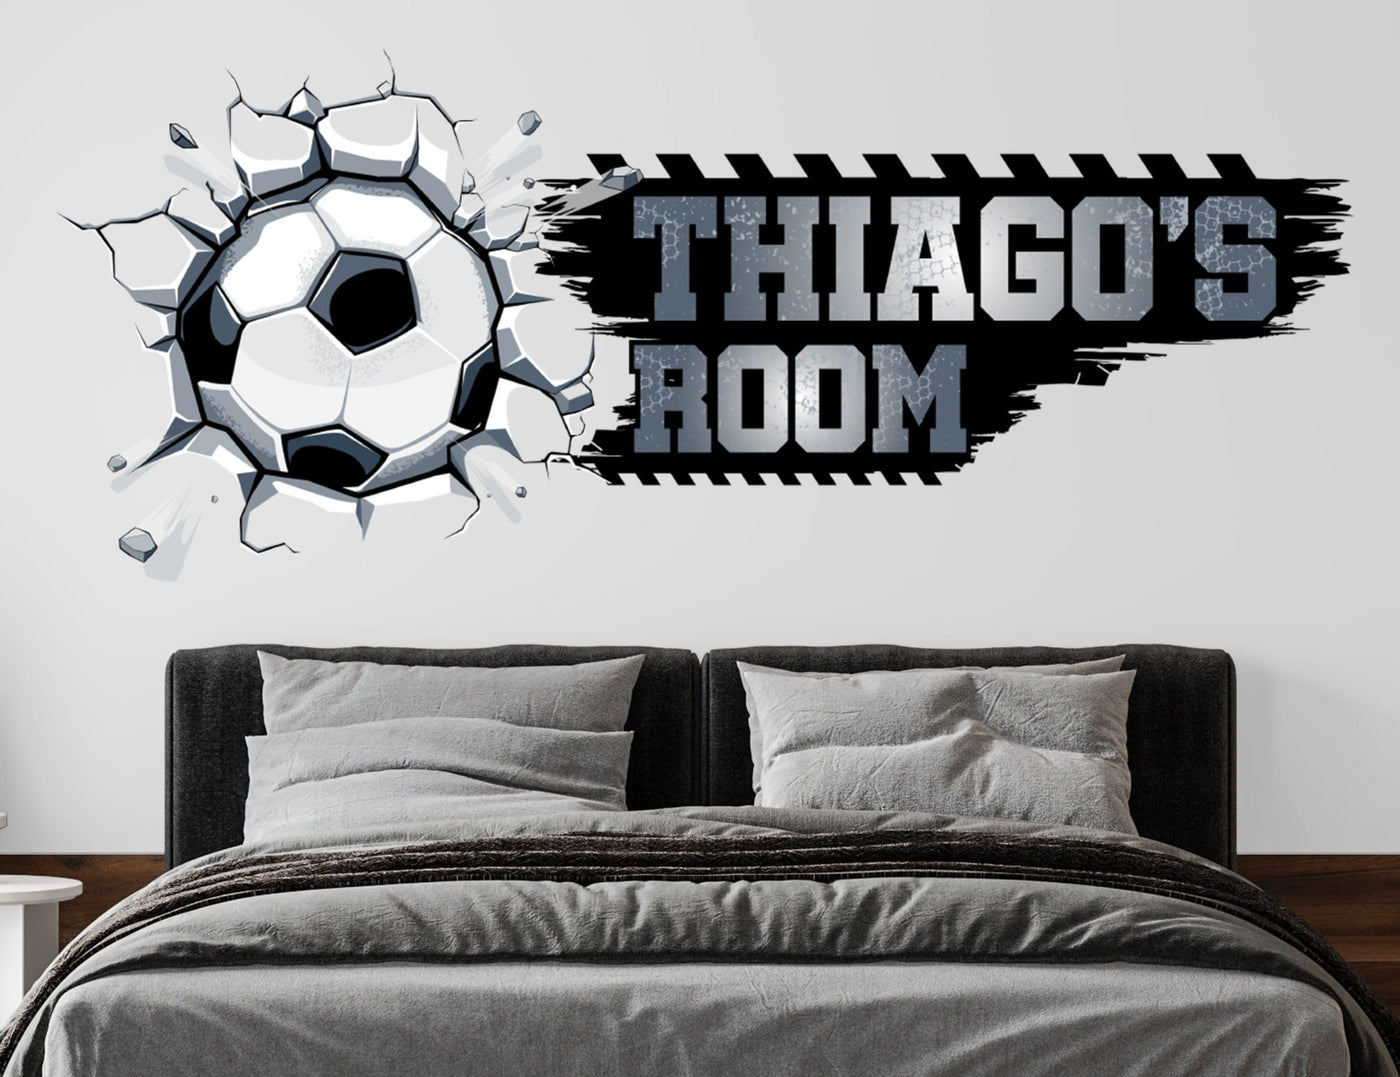 Name Soccer Wall Decals for Boys Room Decor - Soccer Personalized Name for Baby Nursery - Soccer Wall Decal for Boys Room - Custom Art